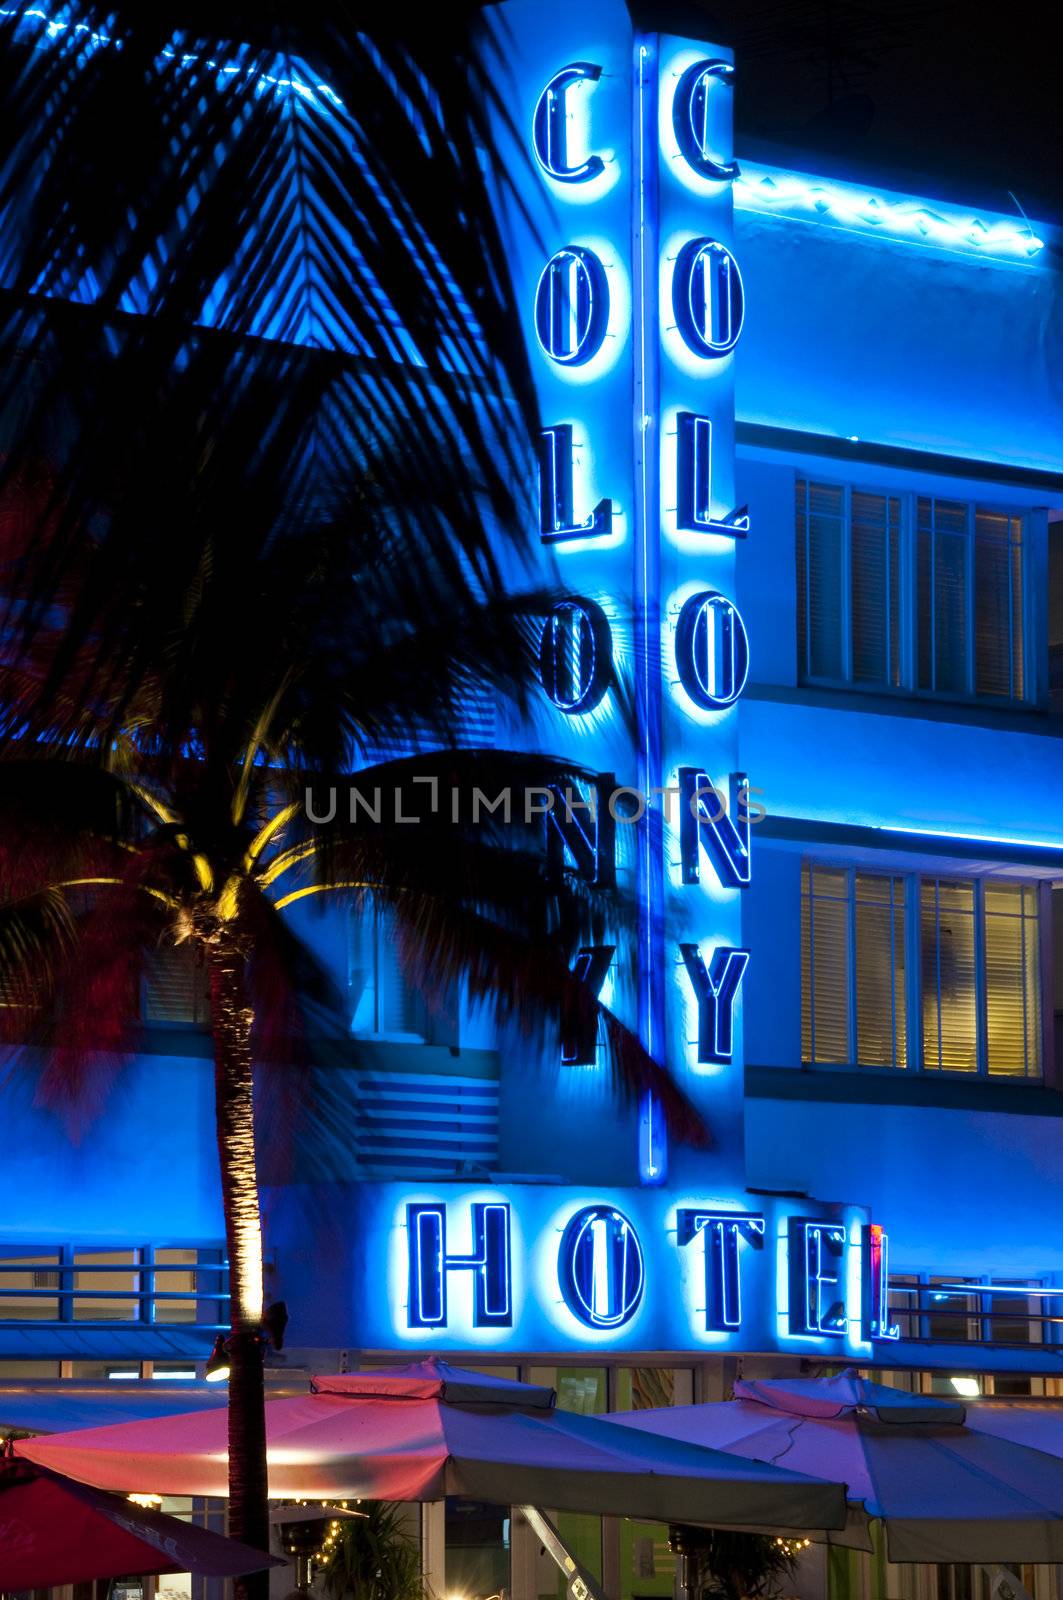 February 2009, Miami Beach. Florida. View of Hotel Colony. The Colony Hotel is one of the most recognized buildings in the art deco district in Miami Beach Florida. The hotel has recently renovated.